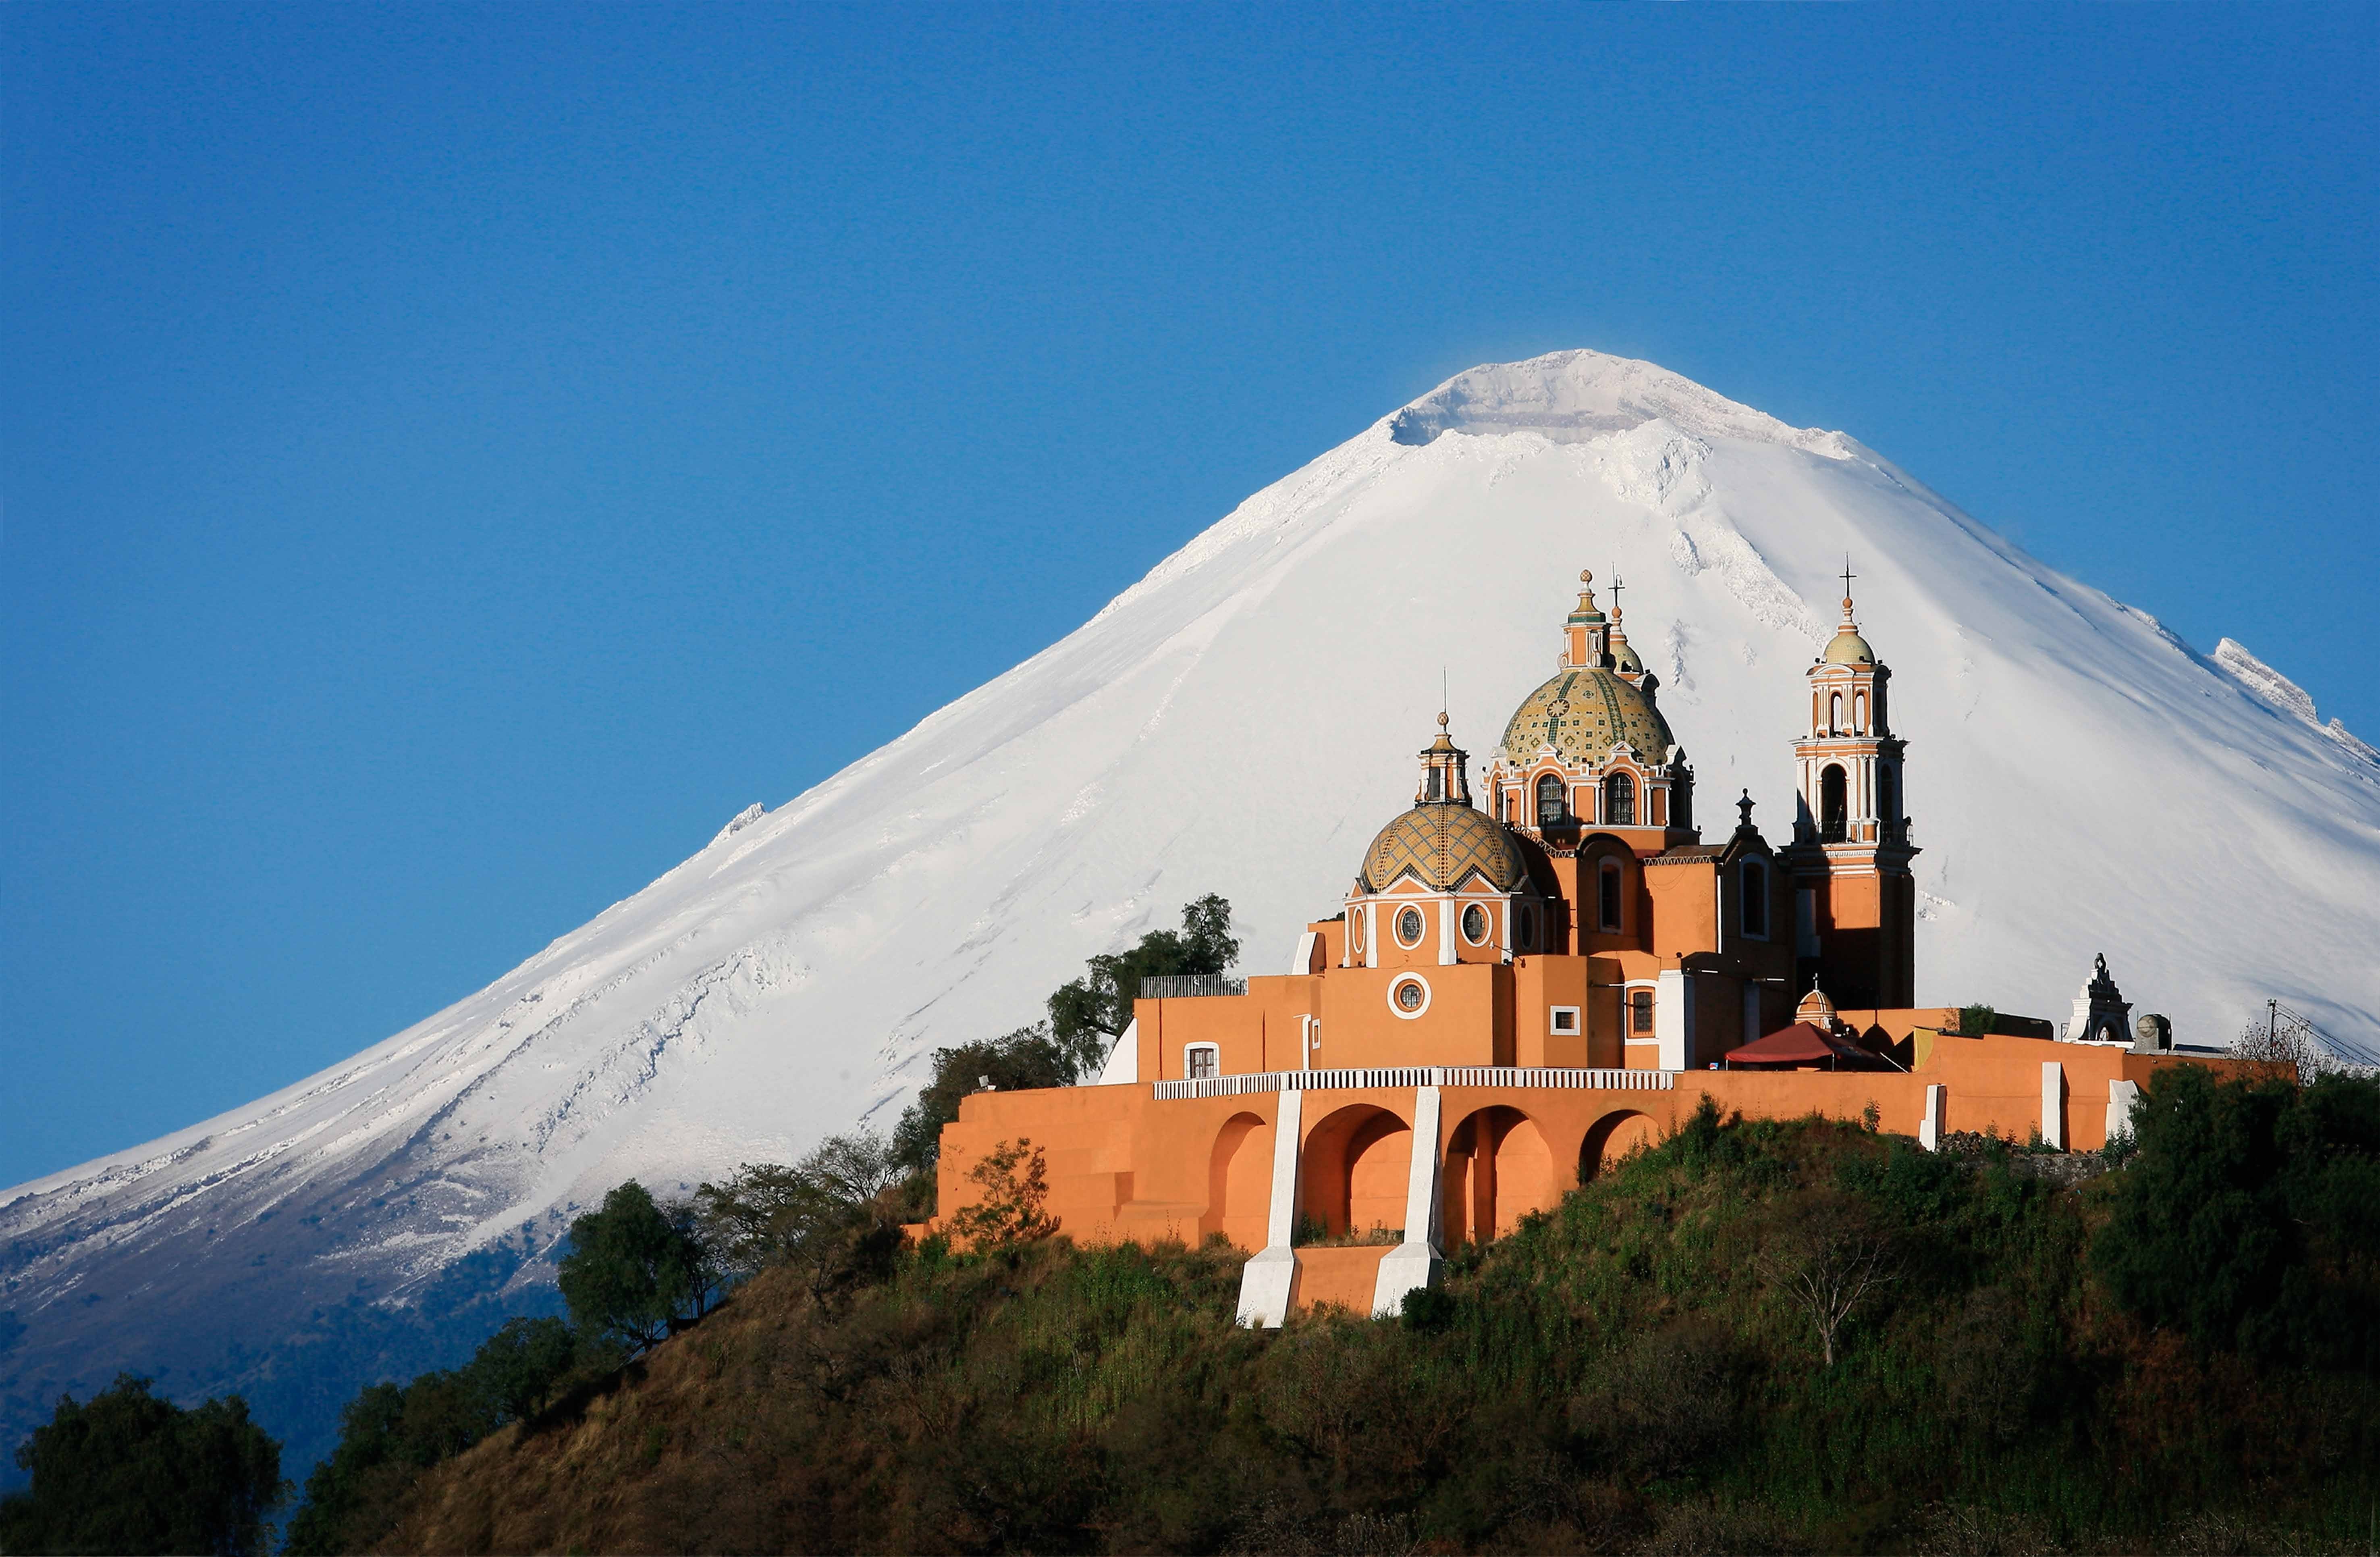 General 5906x3863 volcano mountains landscape Mexico church outdoors snowy peak